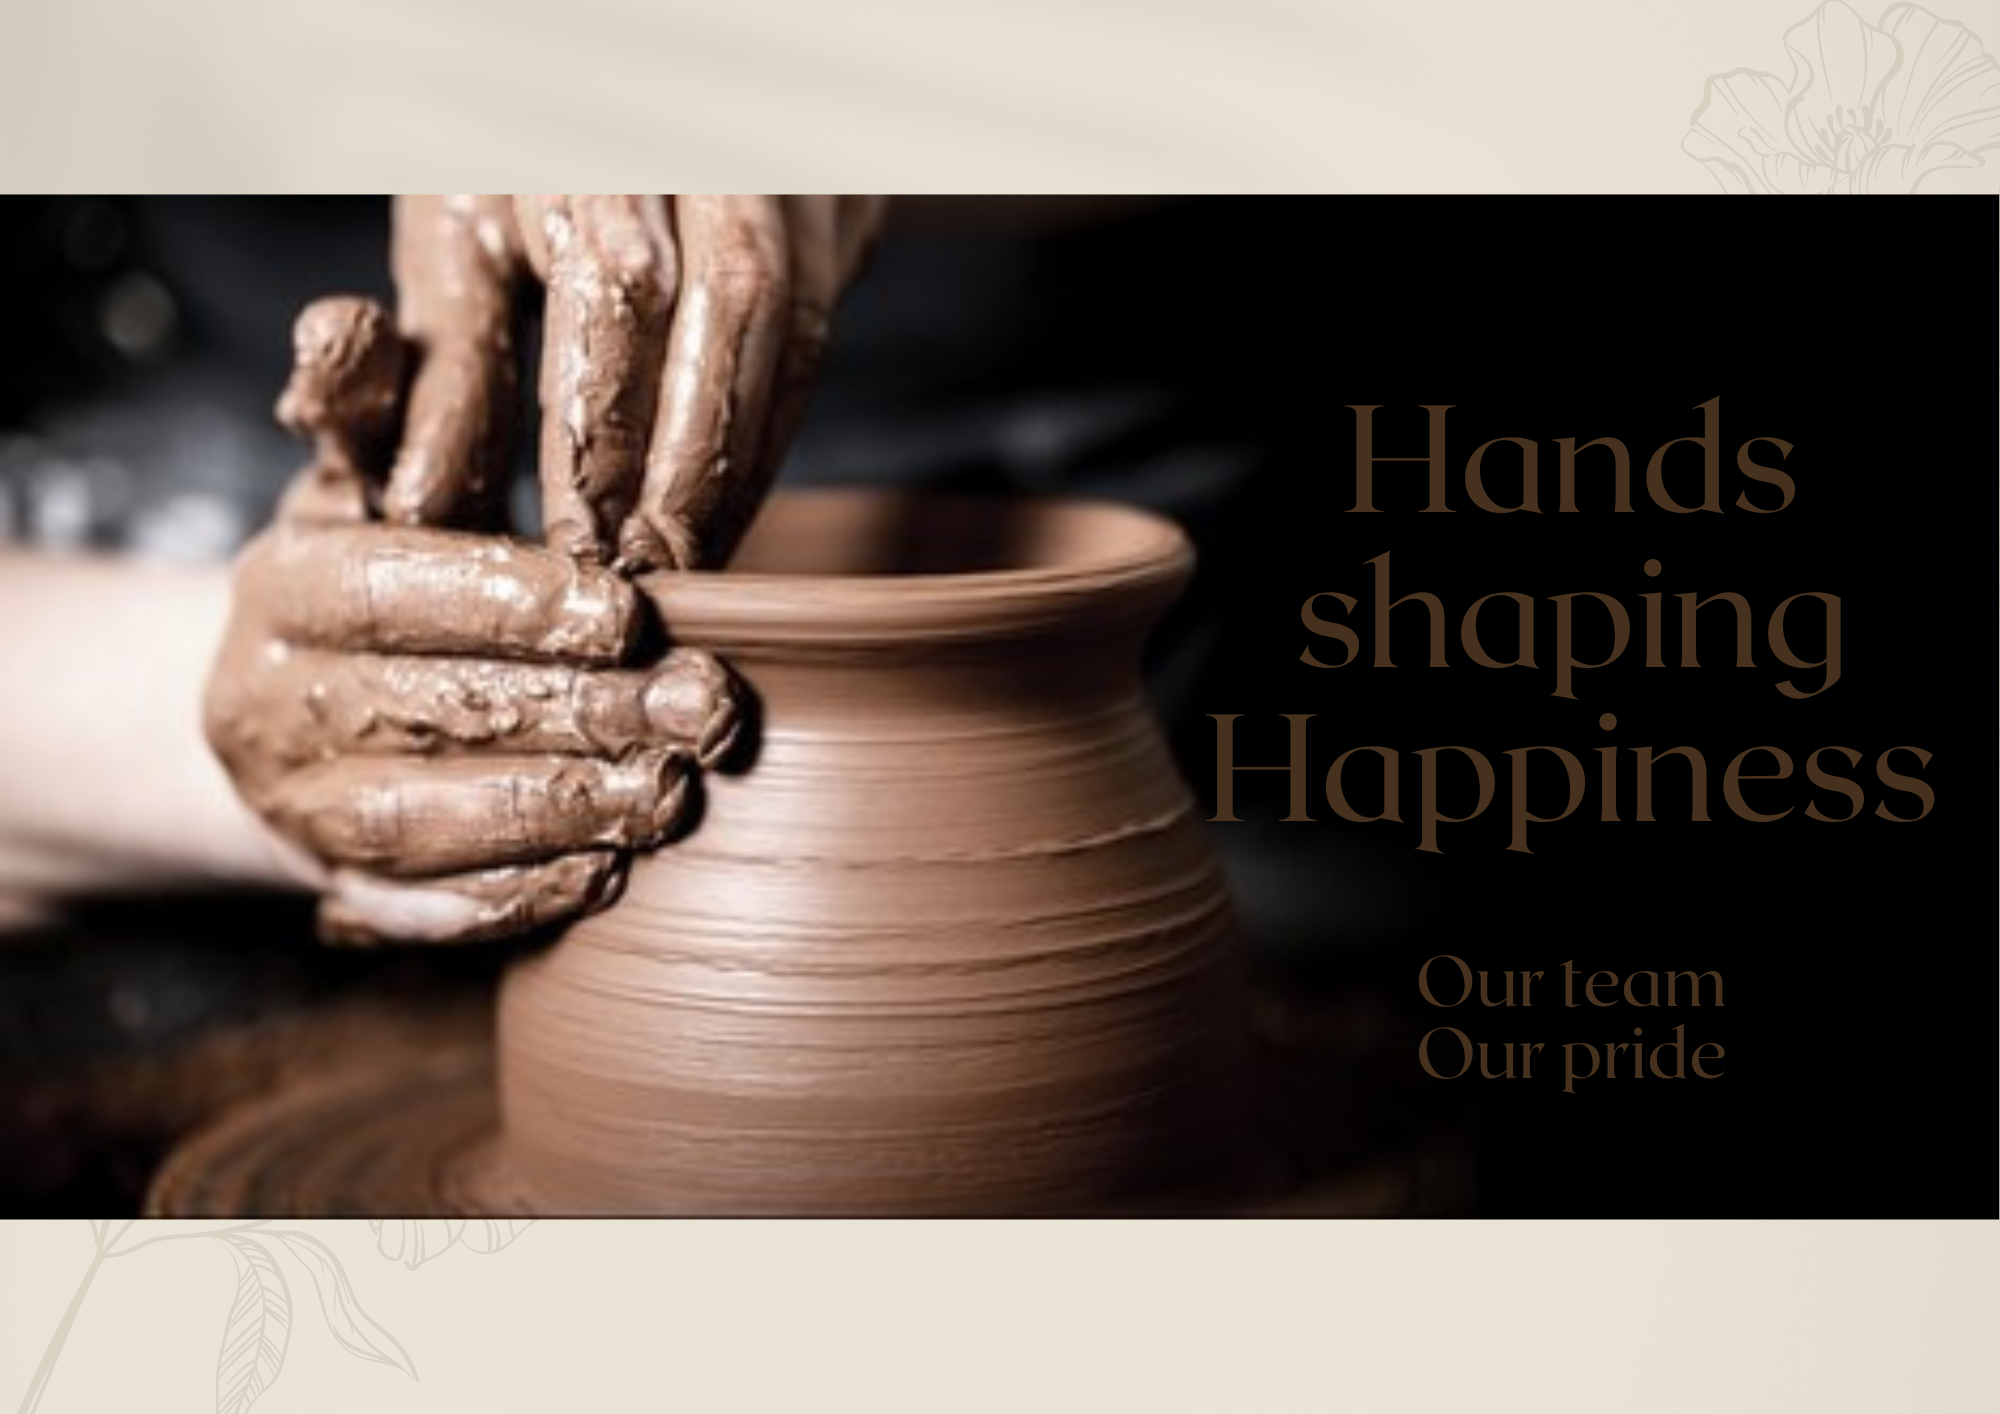 Hands shaping Happiness